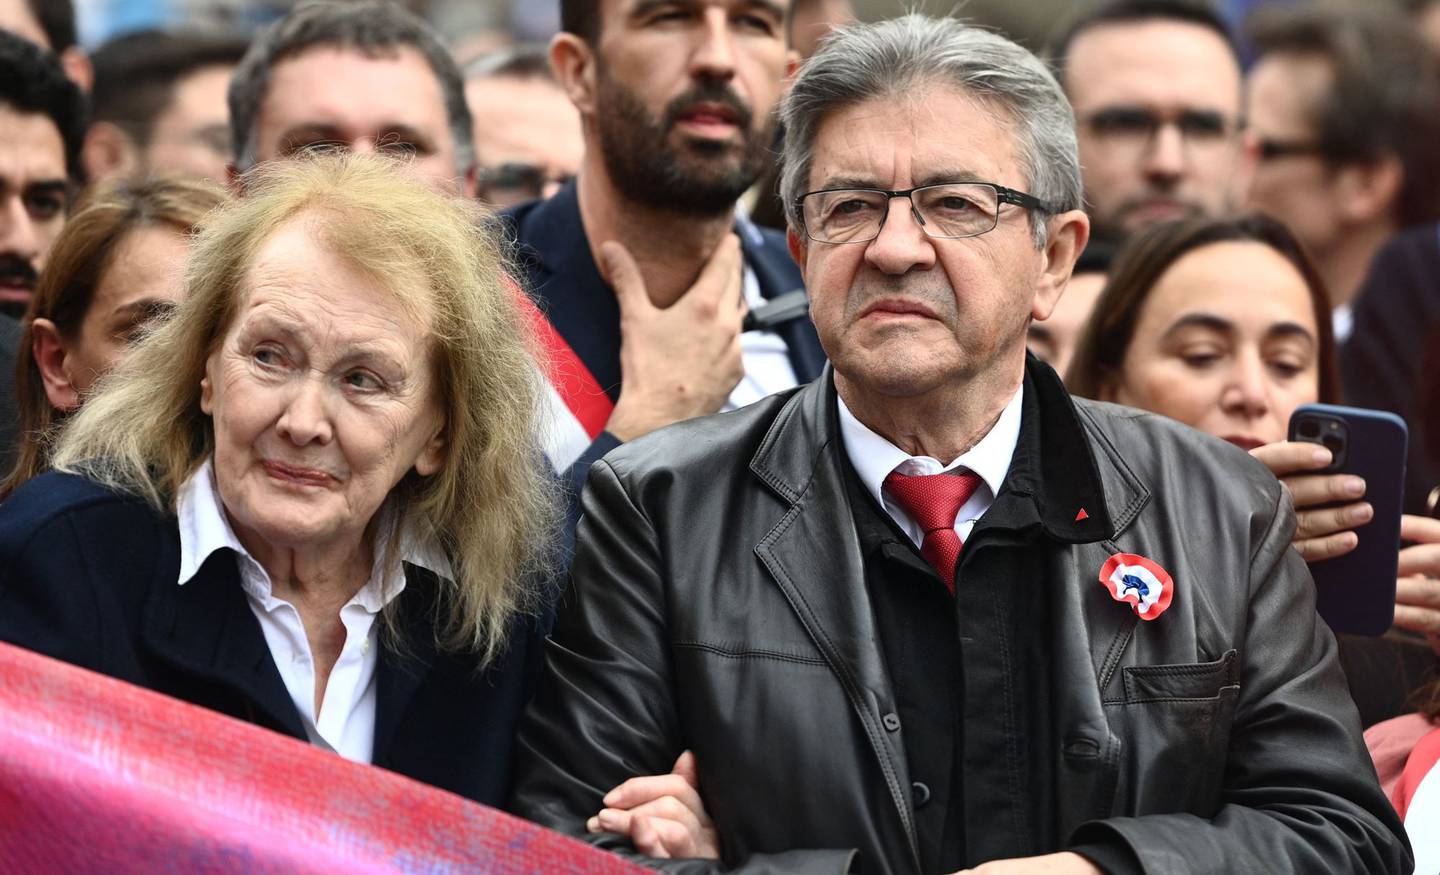 2022 Nobel Literature Prize laureate French novelist Annie Ernaux (L) and Founder of La France Insoumise (LFI) and member of left-wing coalition NUPES (New People's Ecologic and Social Union) Jean-Luc Melenchon attend a rally against soaring living costs and climate inaction called by French left-wing coalition NUPES (New People's Ecologic and Social Union) in Paris on October 16, 2022. (Photo by Christophe ARCHAMBAULT / AFP)